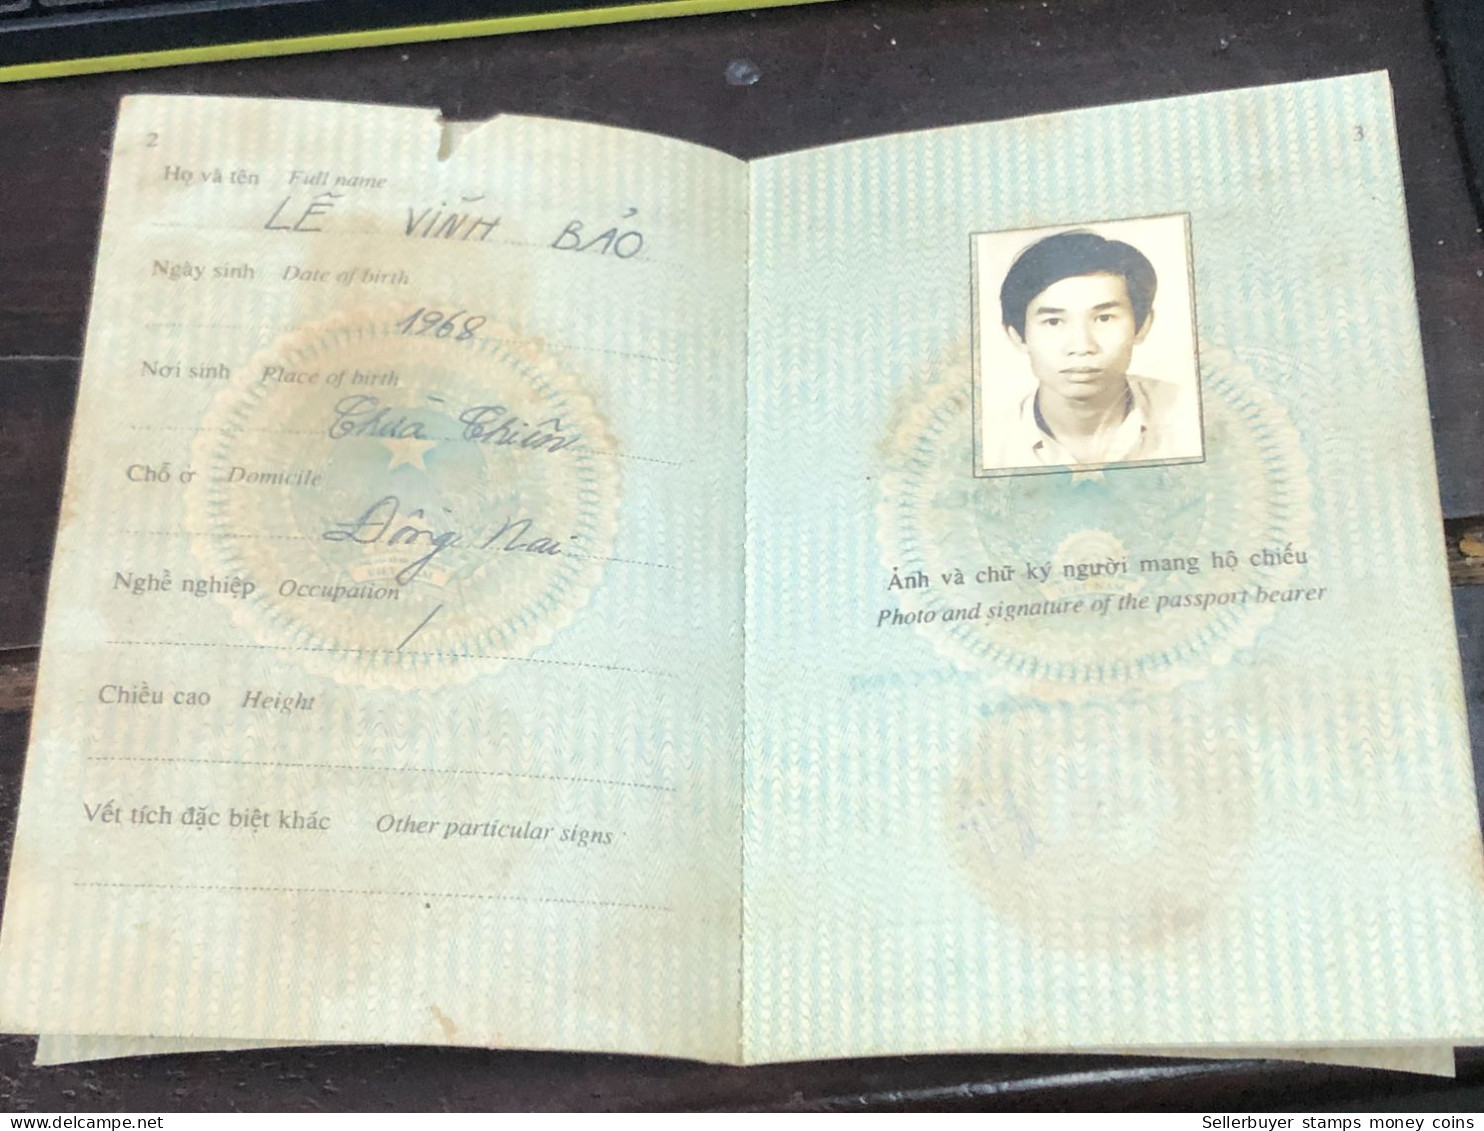 VIET NAM -OLD-ID PASSPORT-name-LE VINH BAO-1996-1pcs Book - Collections